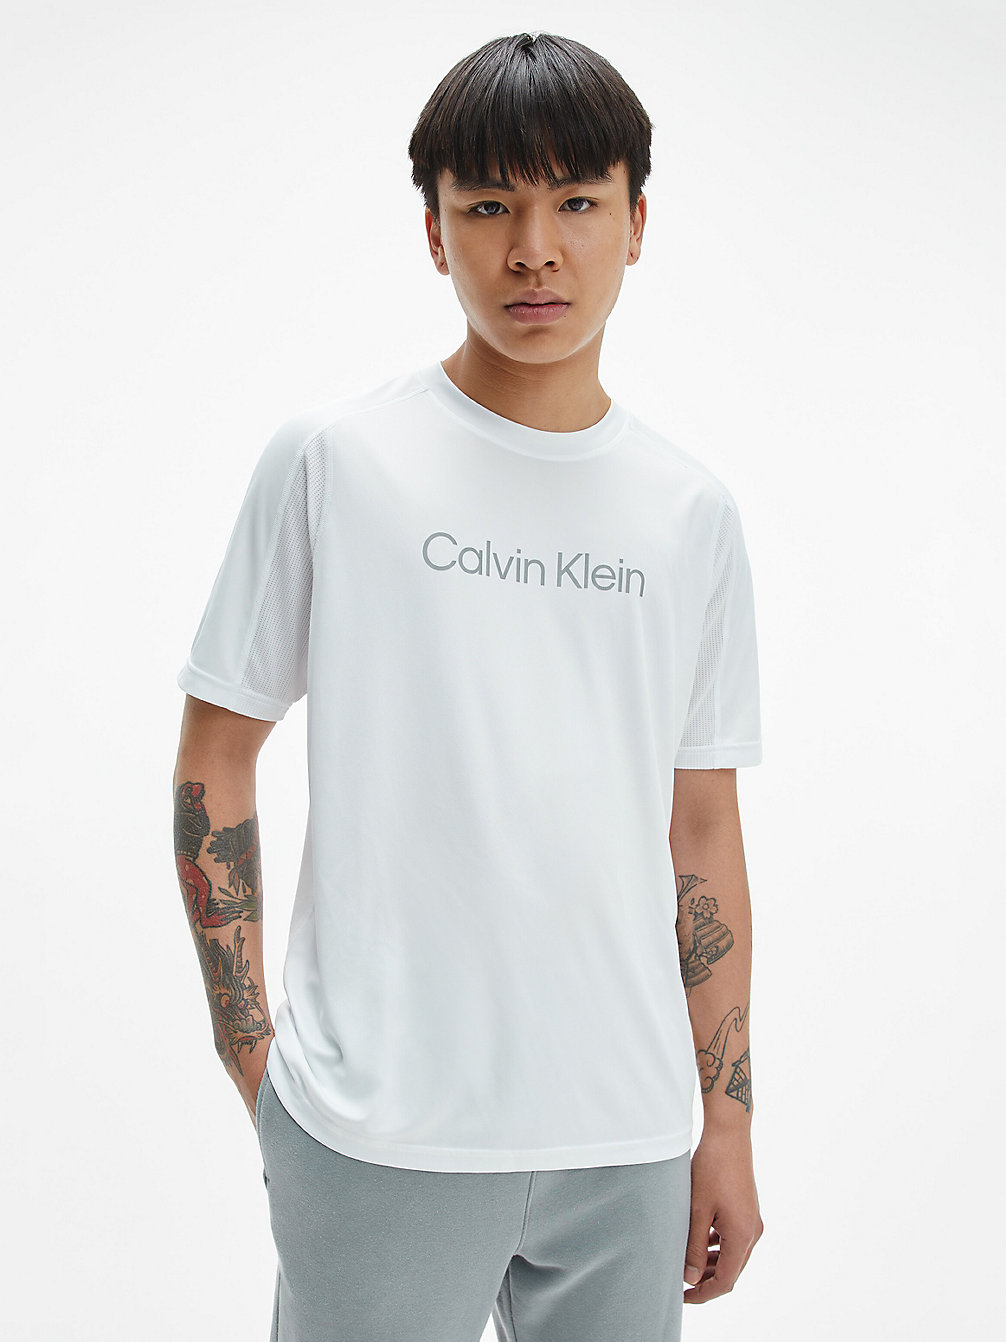 BRIGHT WHITE Recycled Polyester Gym T-Shirt undefined men Calvin Klein